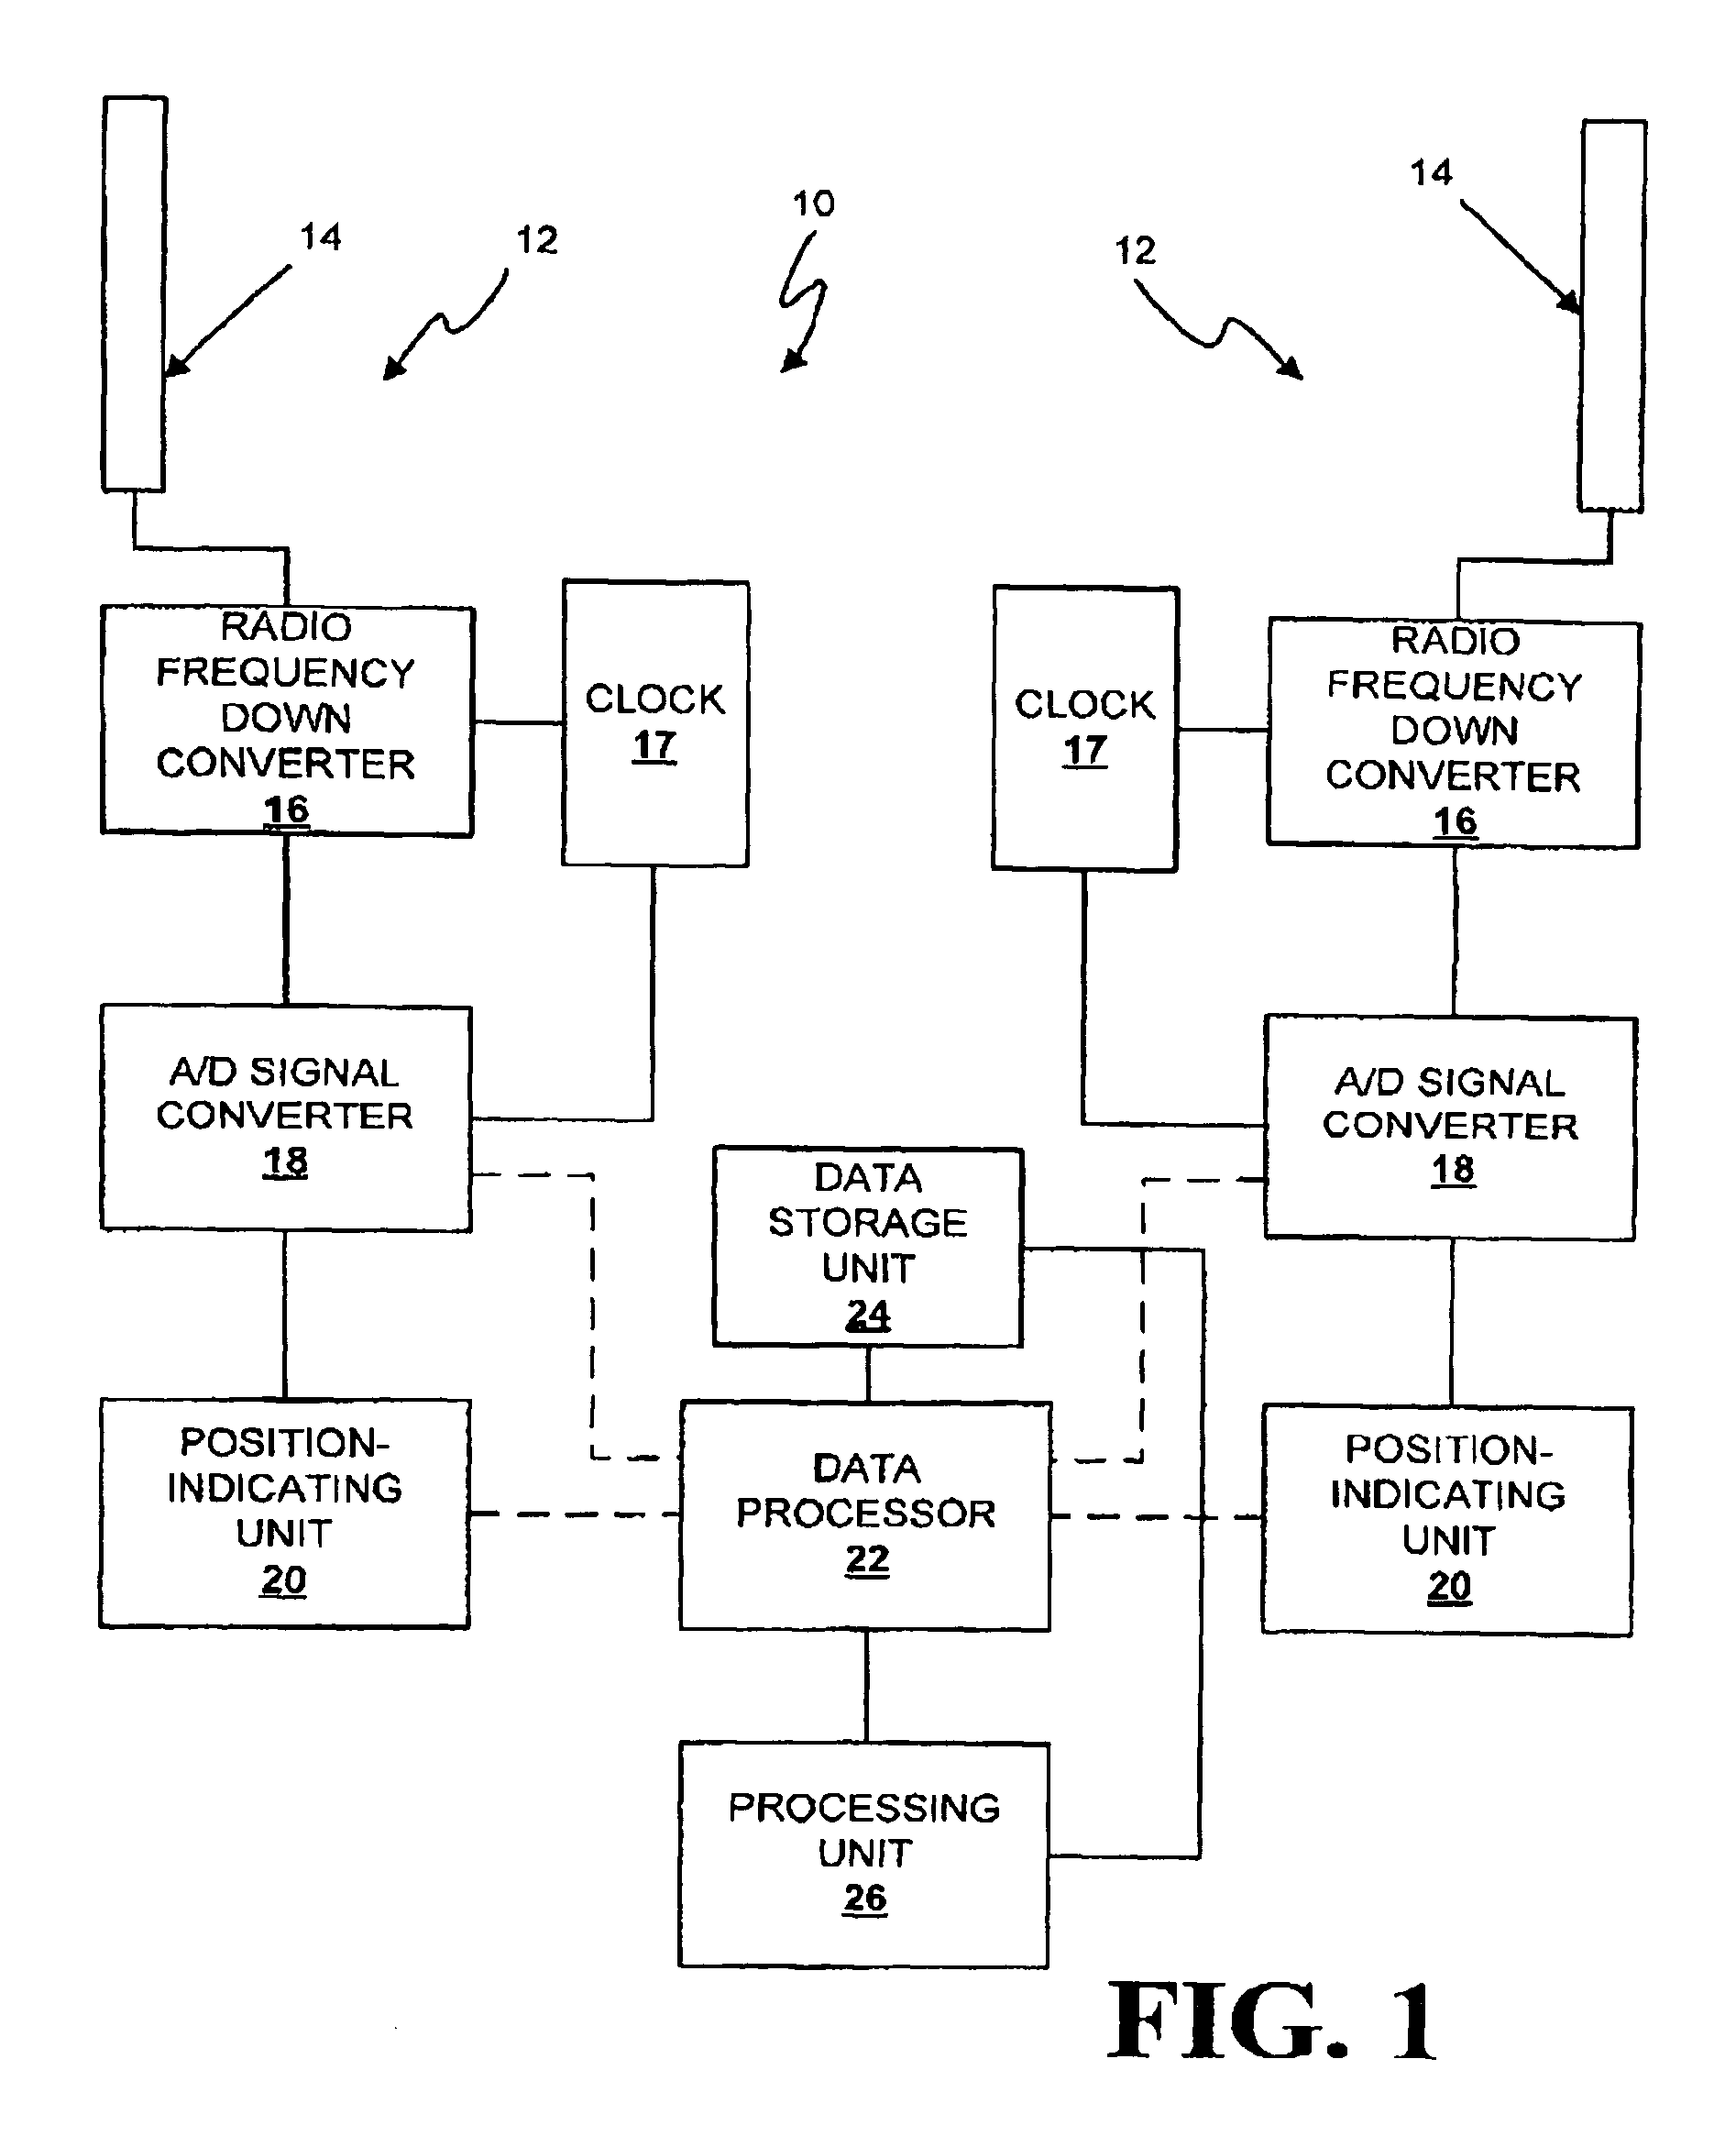 Method and apparatus for locating the source of radio frequency emissions